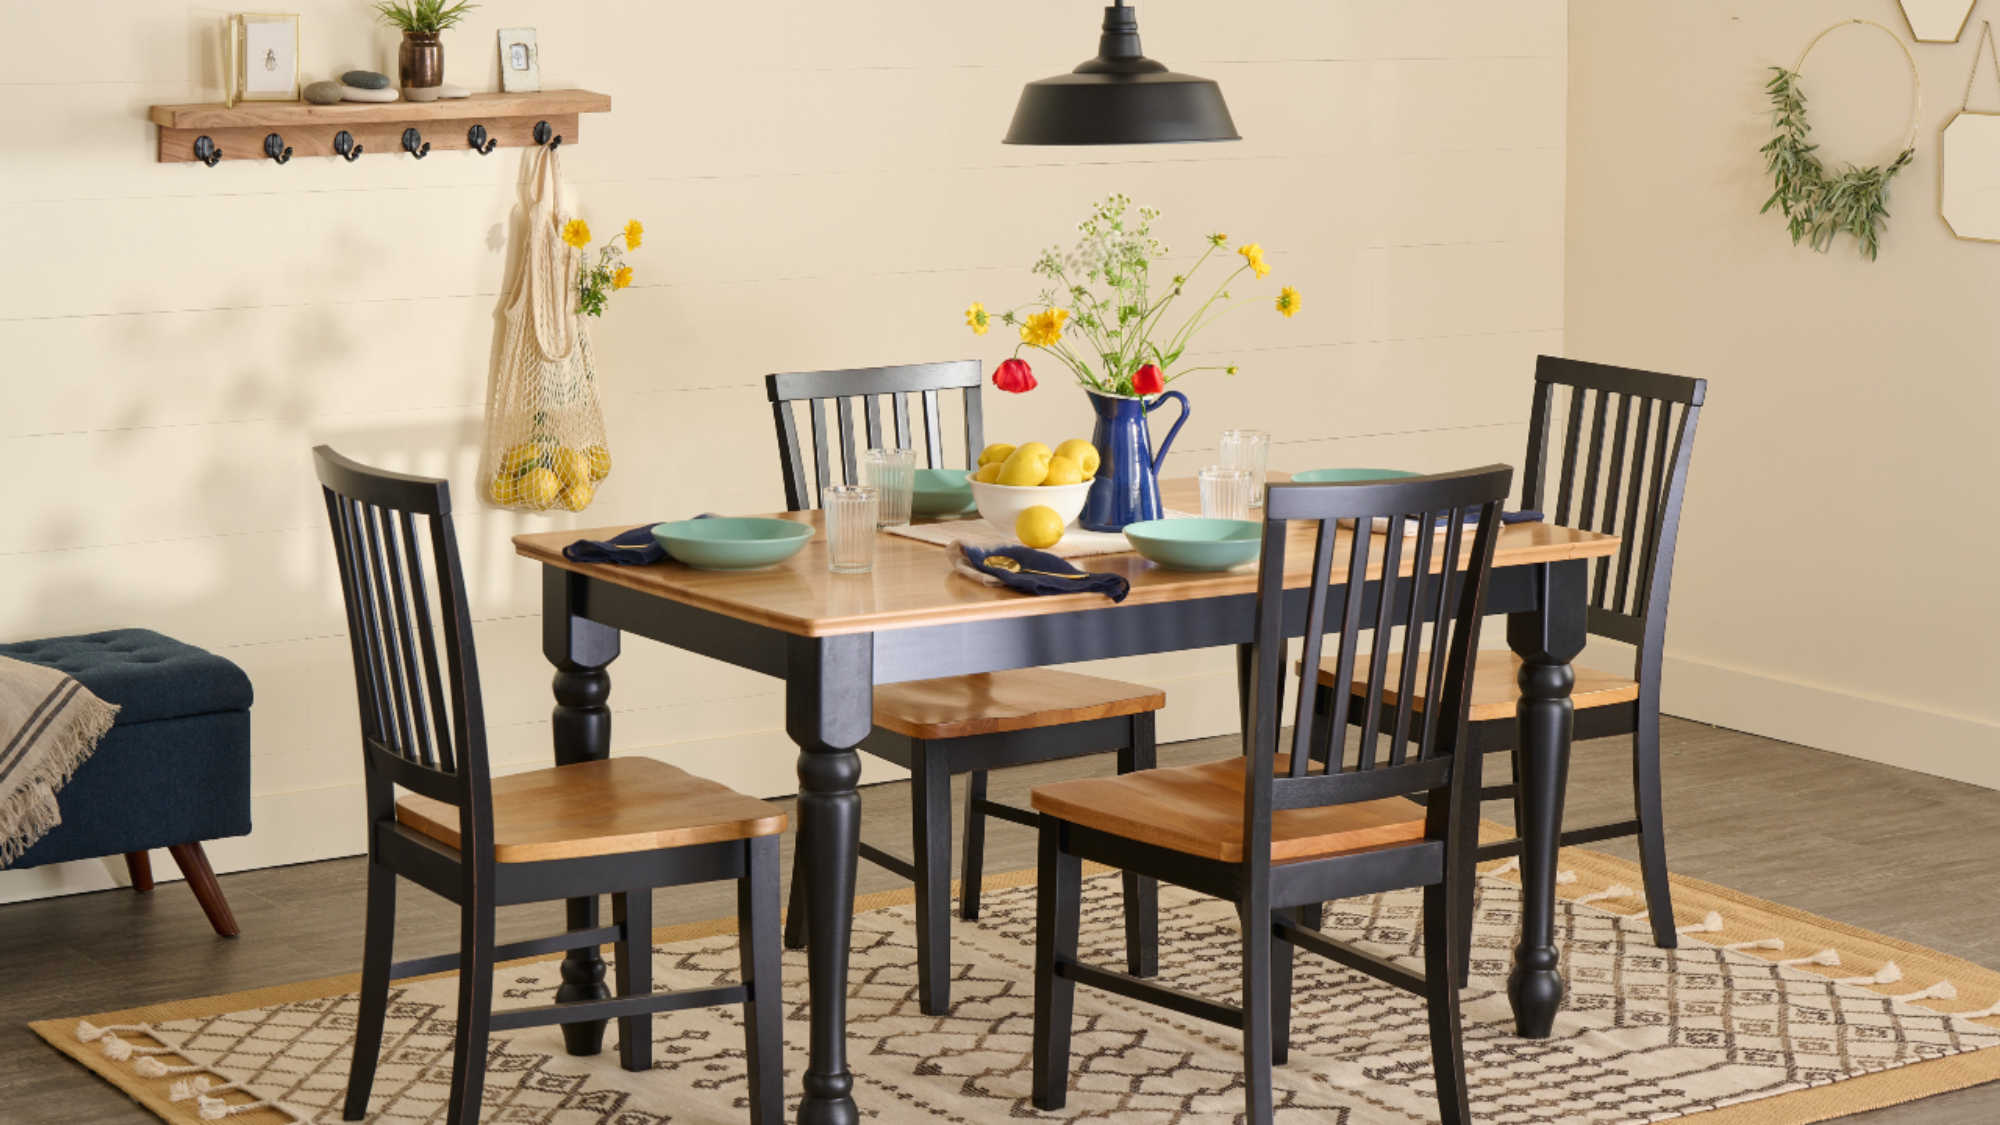 A brand new table and chairs, crafted by associates through DI Manufacturing, showcased within a home.